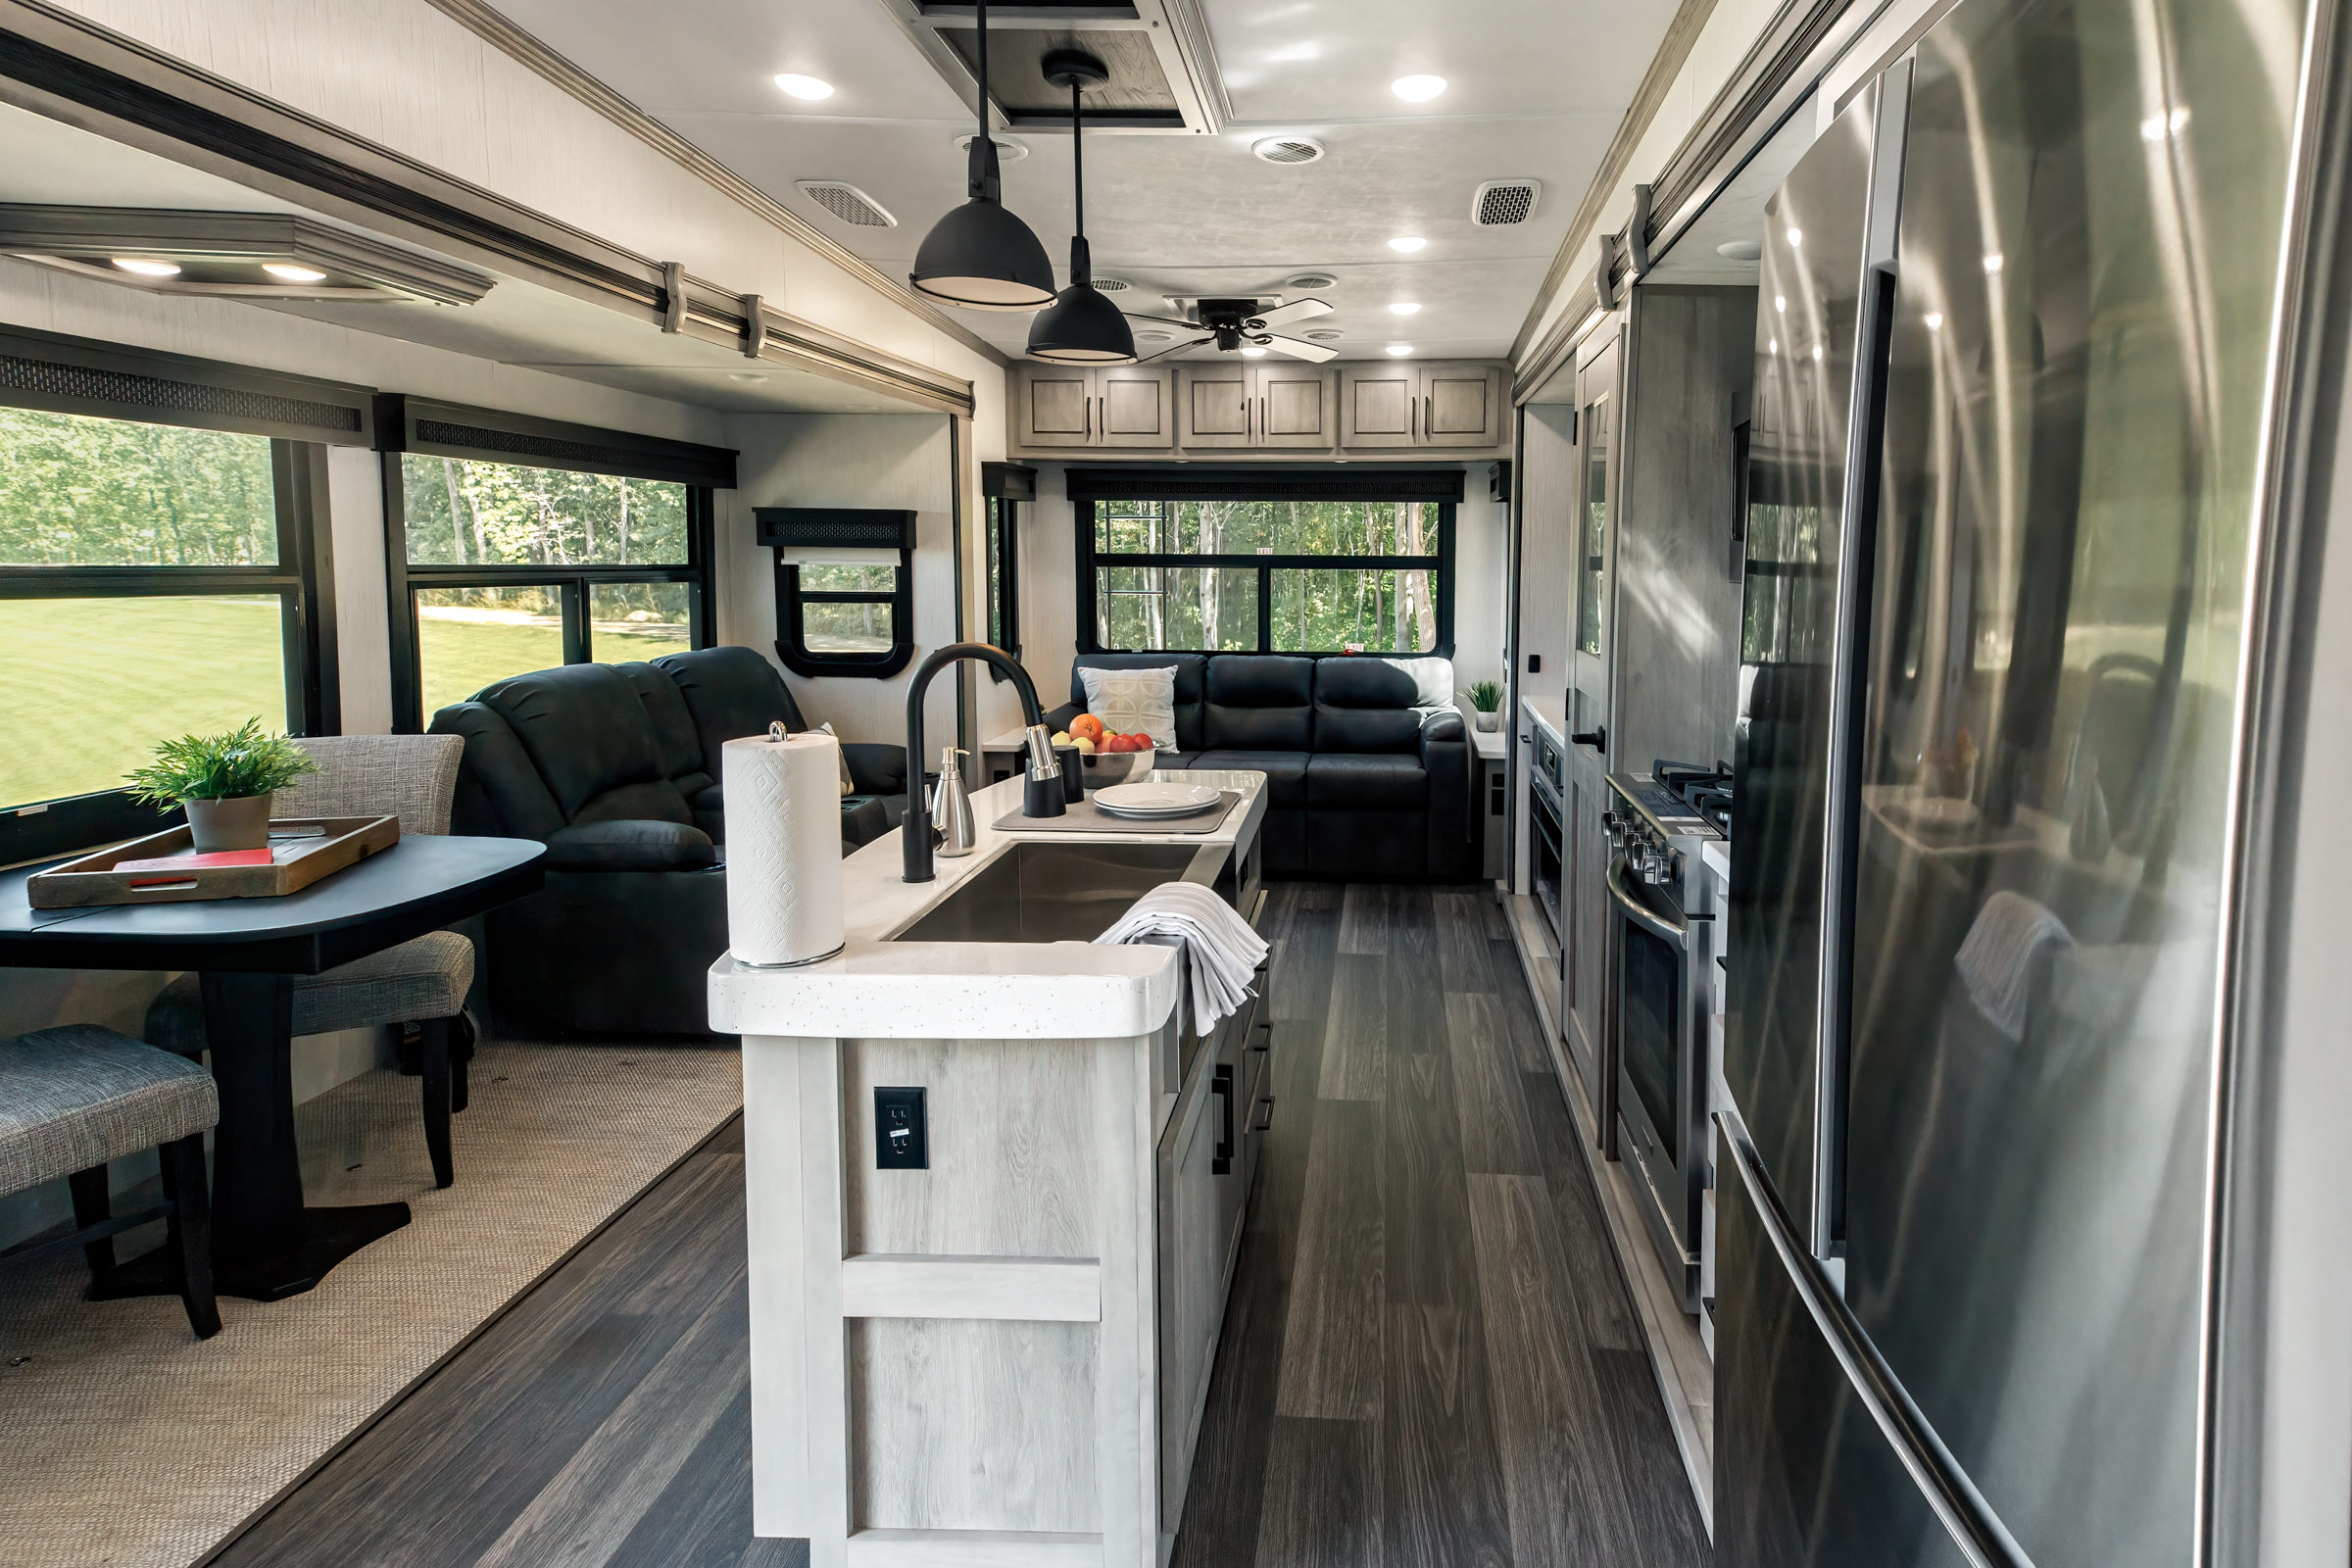 The interior of the Big Country RV, showing the kitchen and living room areas.